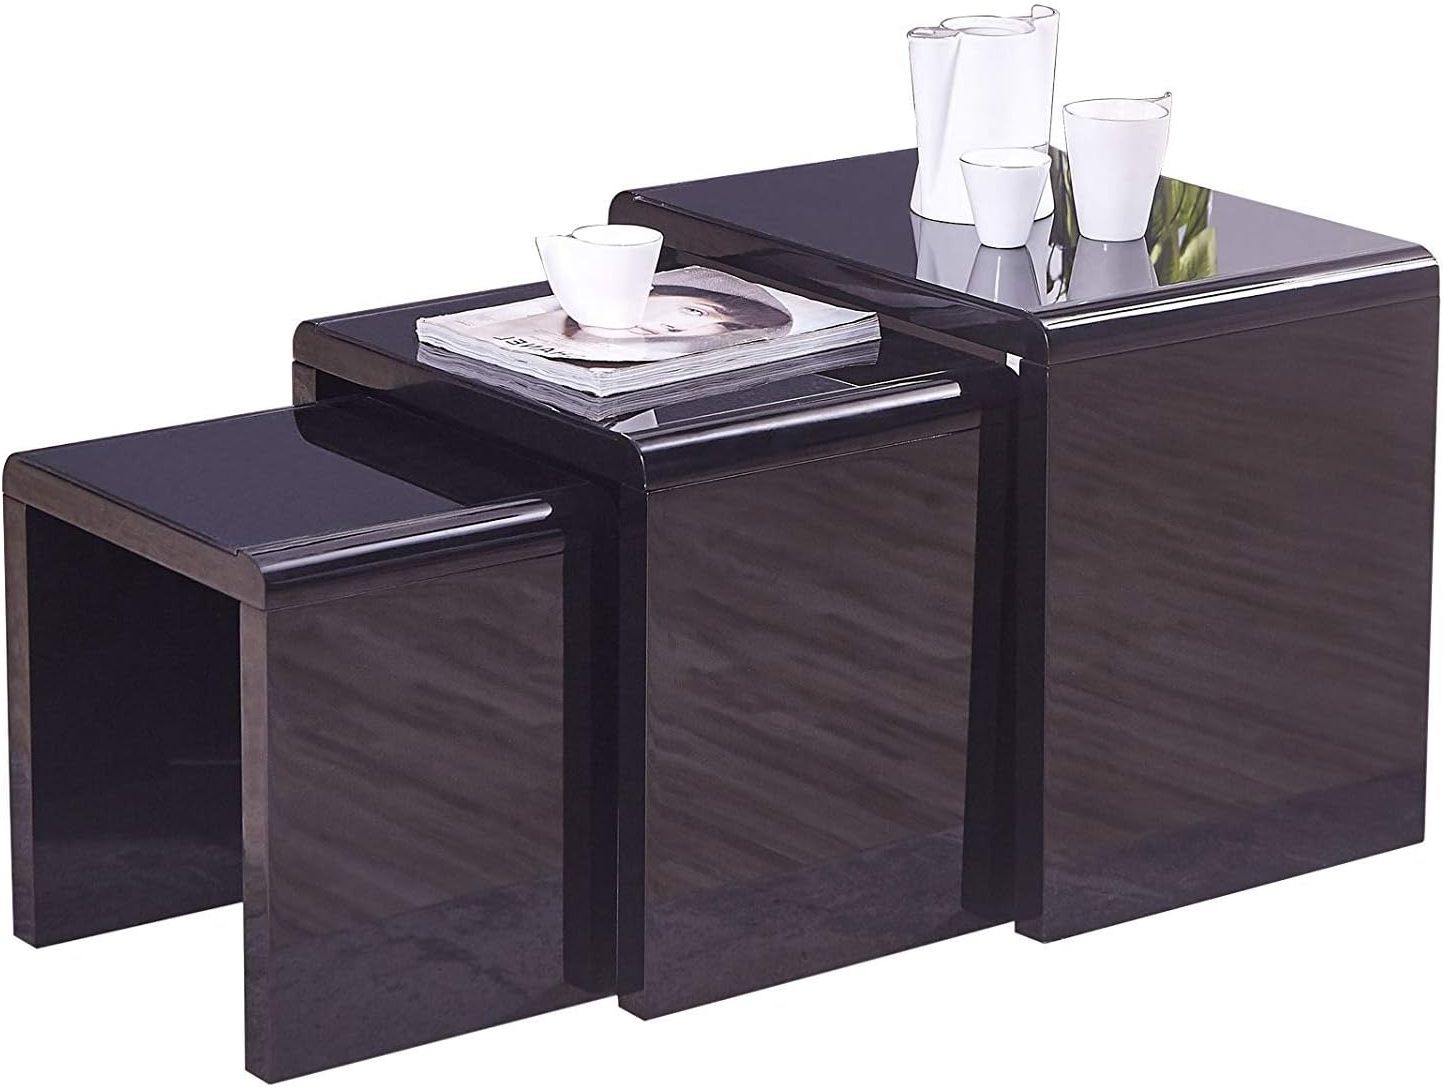 Most Popular Mecor Nest Of 3 Tables High Gloss Nesting Tables Wood Coffee Table In Coffee Tables Of 3 Nesting Tables (Photo 3 of 15)